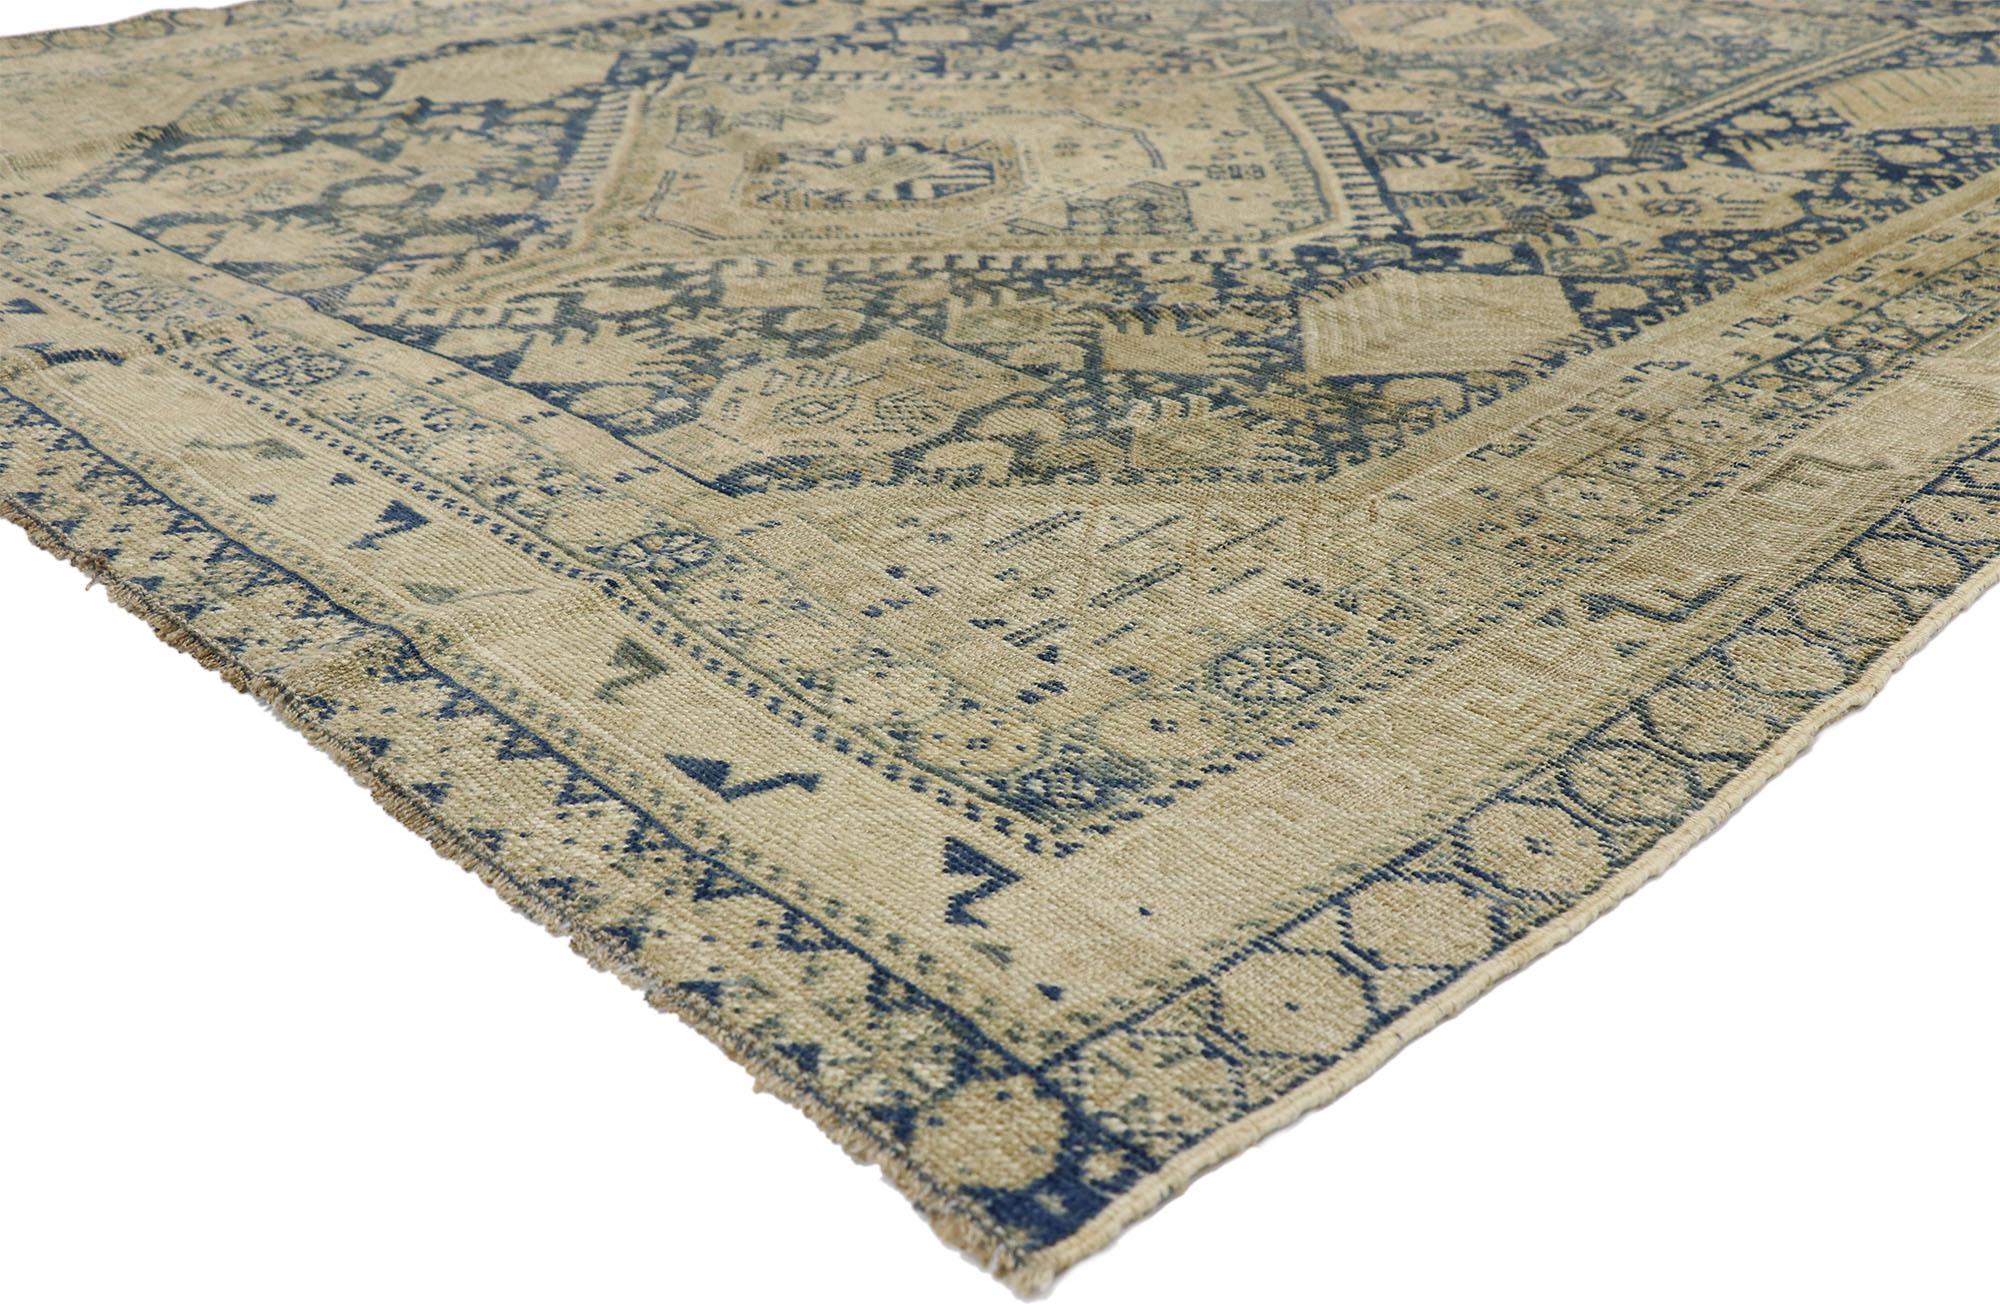 52631, distressed antique Persian Shiraz design rug with British Colonial style. Warm and inviting combined with the right amount of necessary aesthetic elements, this hand knotted wool distressed antique Persian Shiraz design rug charms with ease